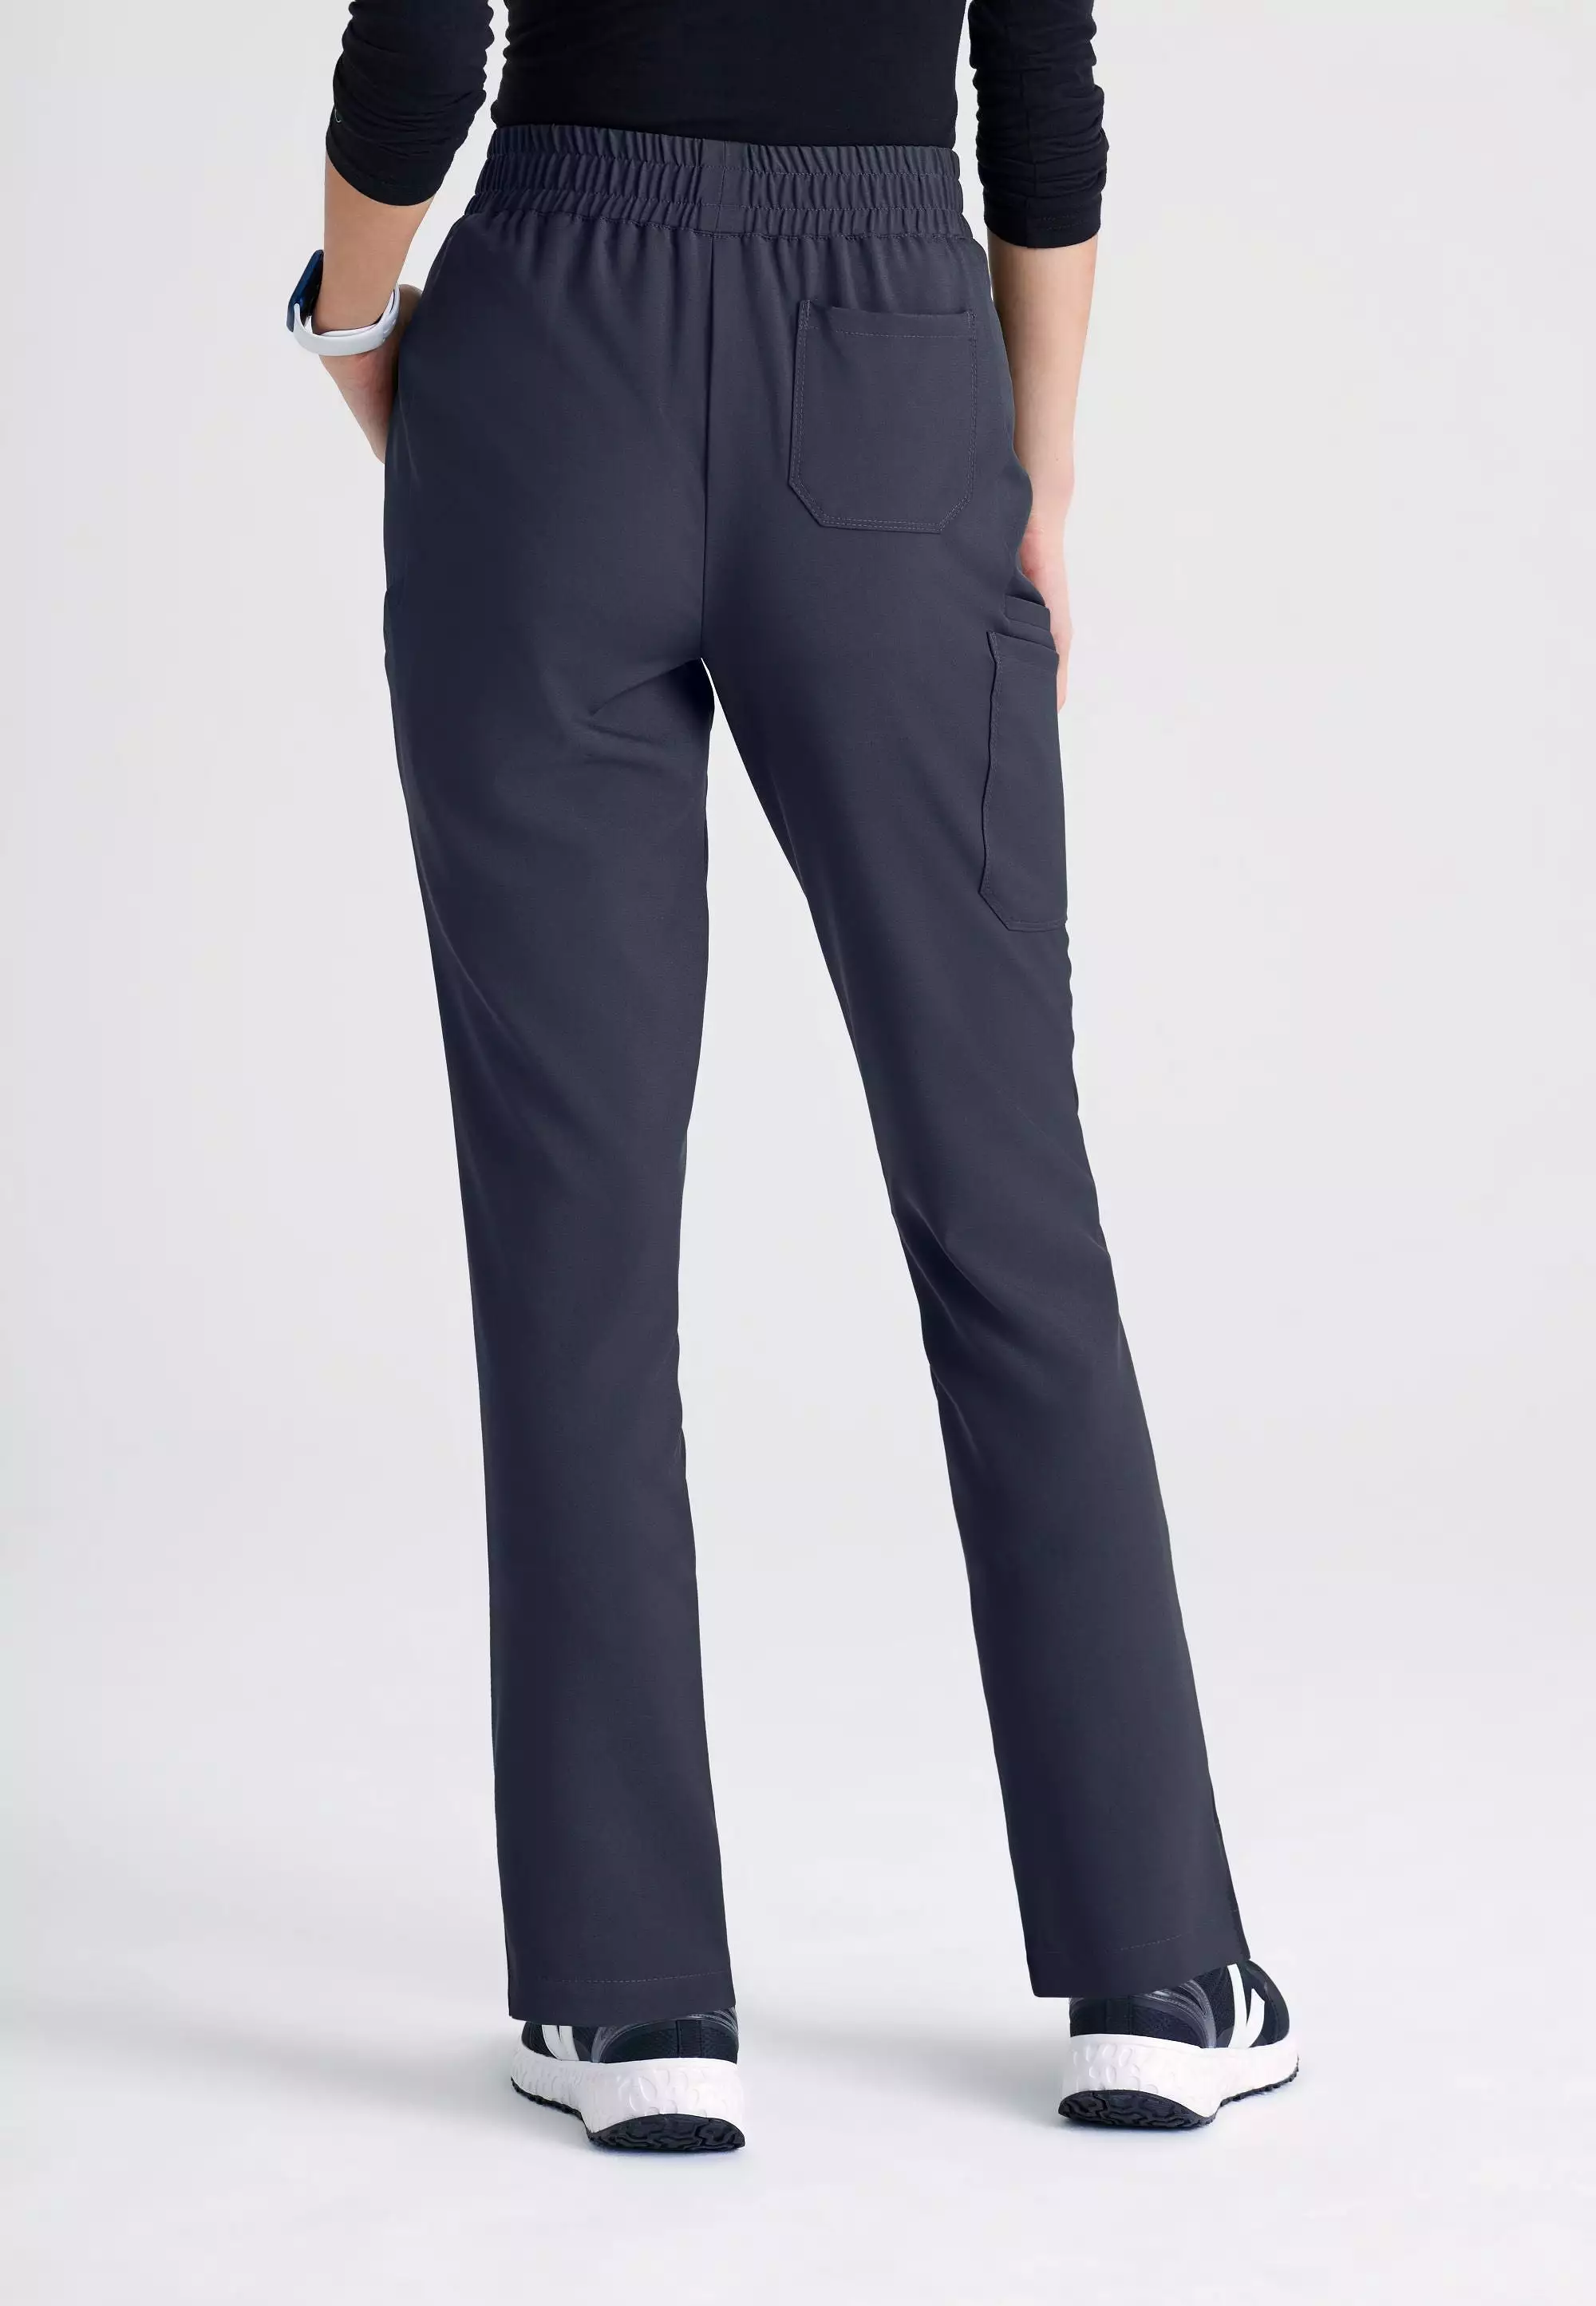 Barco Grey's Anatomy Evolve GSSP627 Cosmo 6 Pocket Tapered Pant - TALL